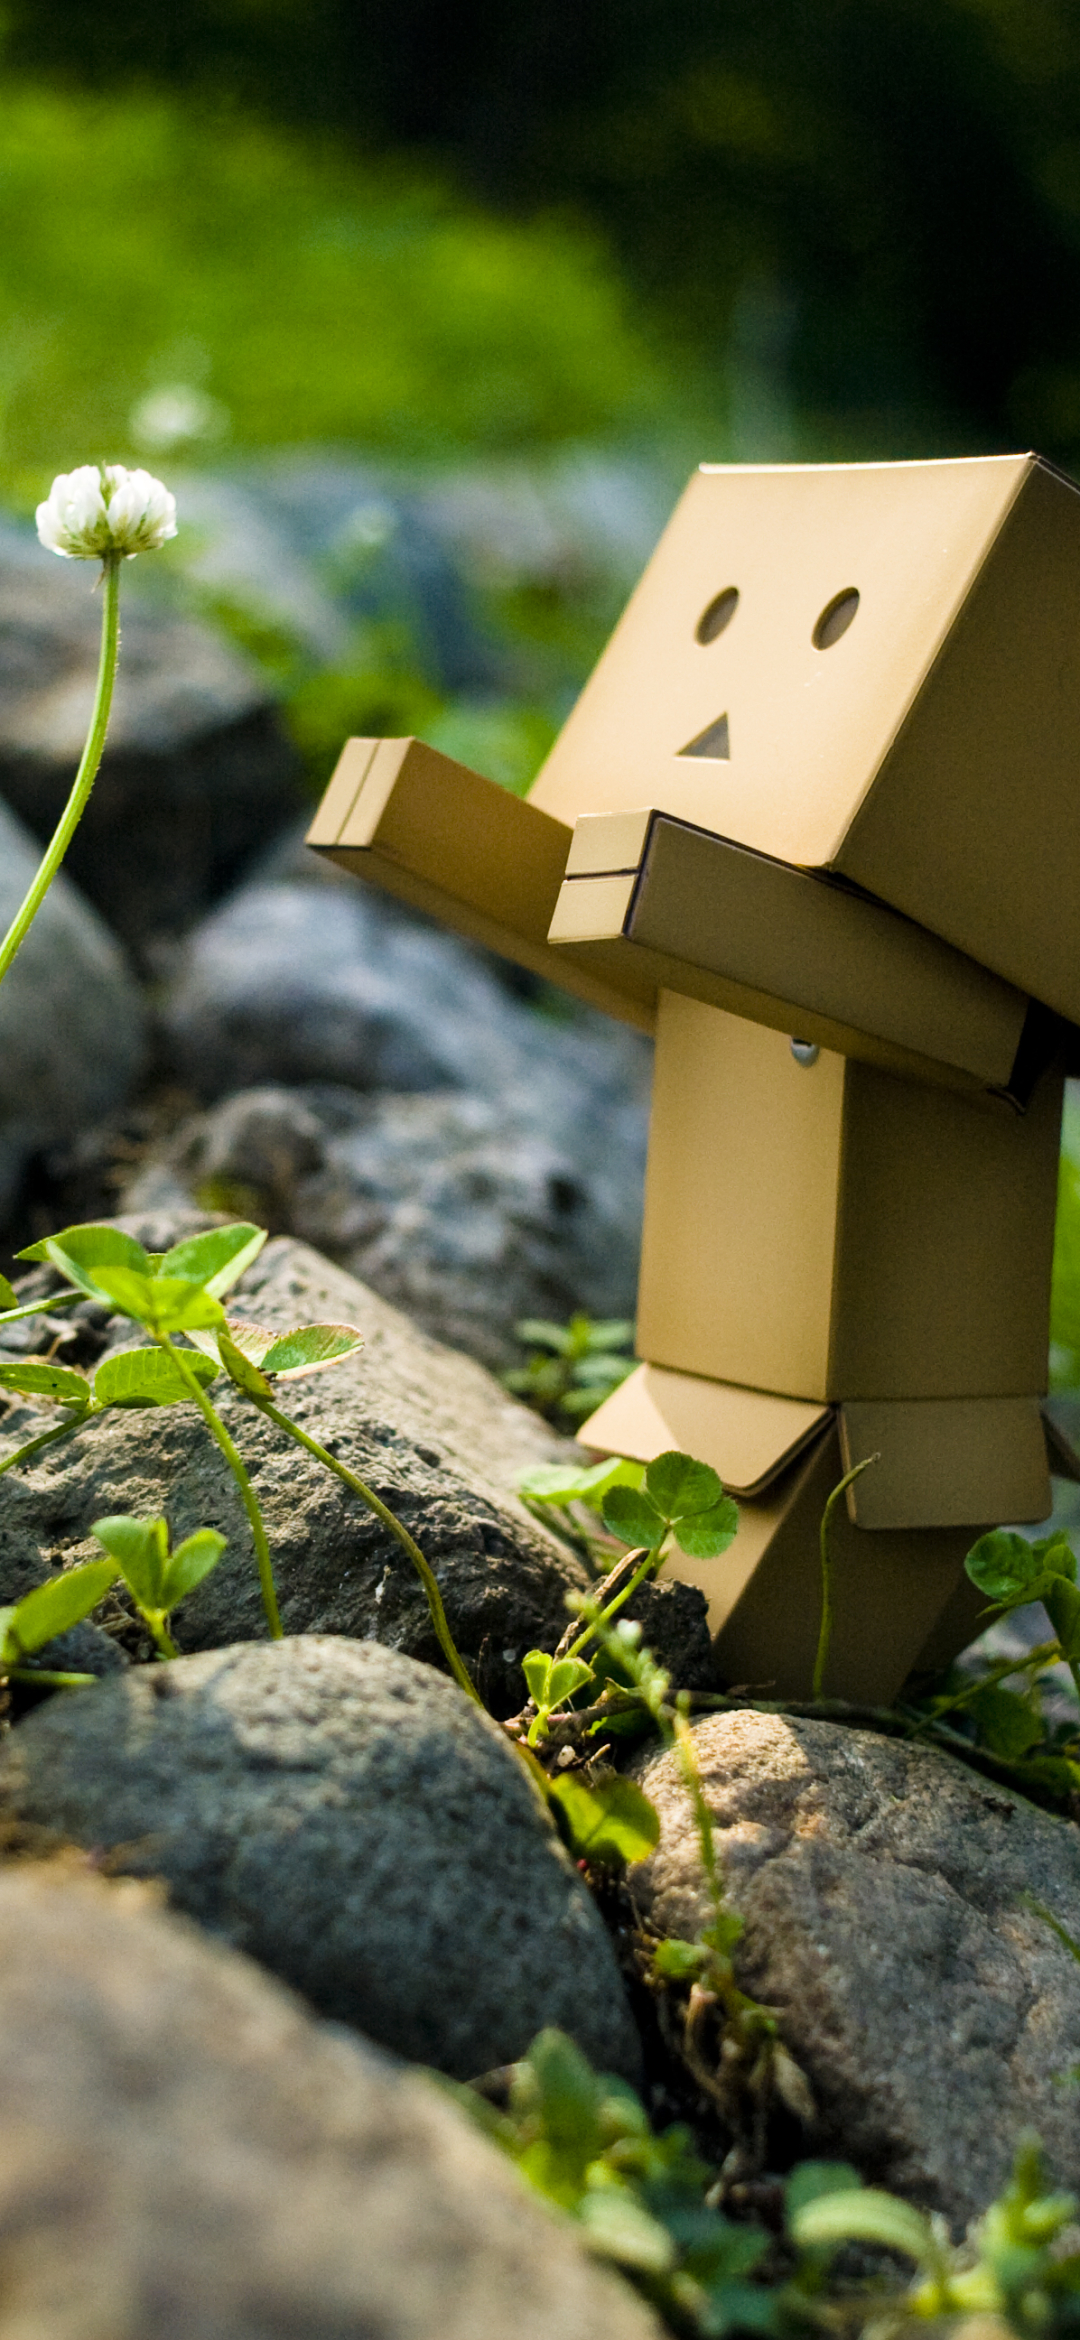 Danbo and a Flower